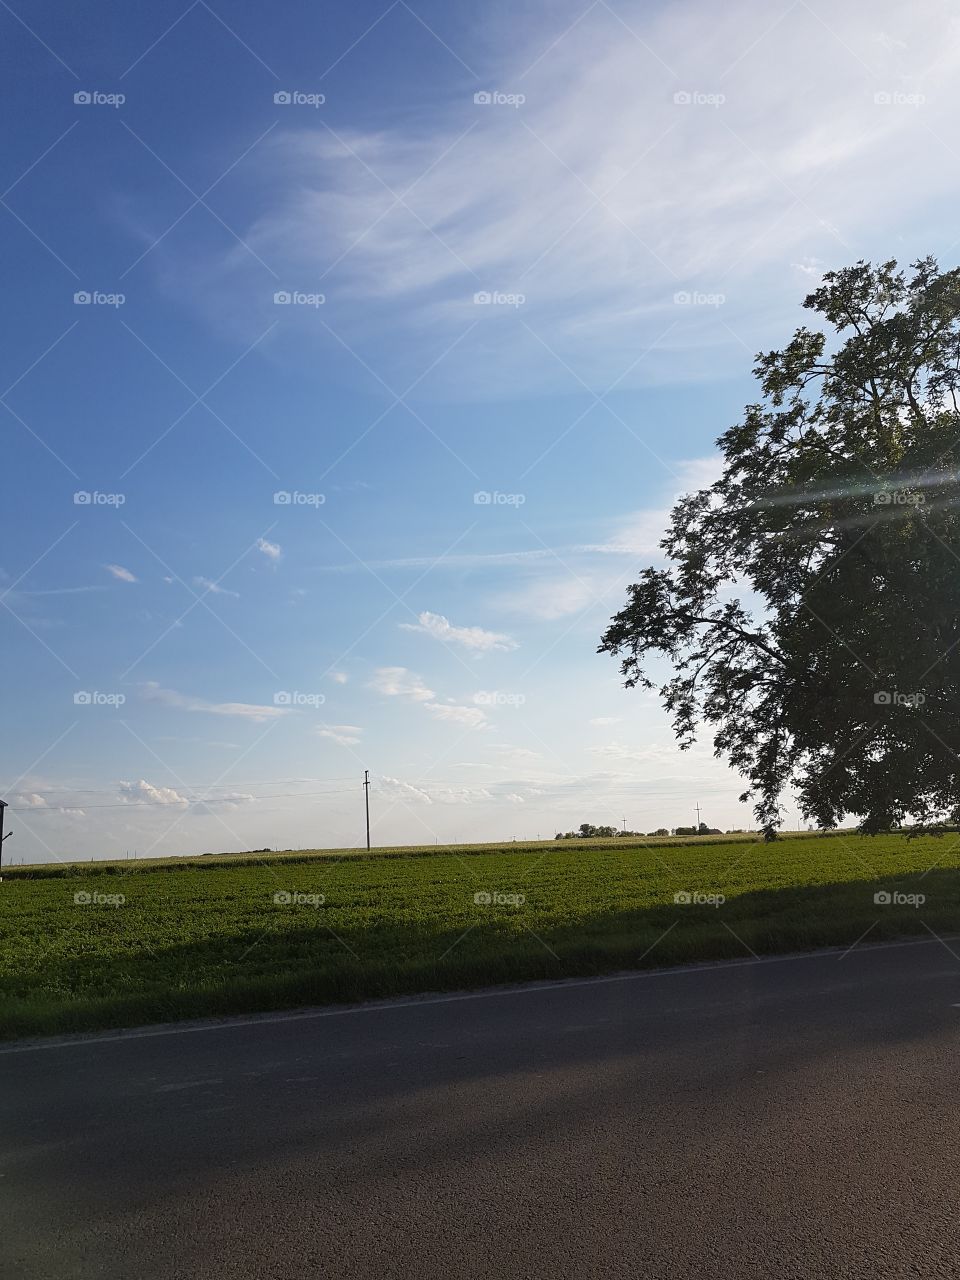 nature scene with sun rays, photographed from car